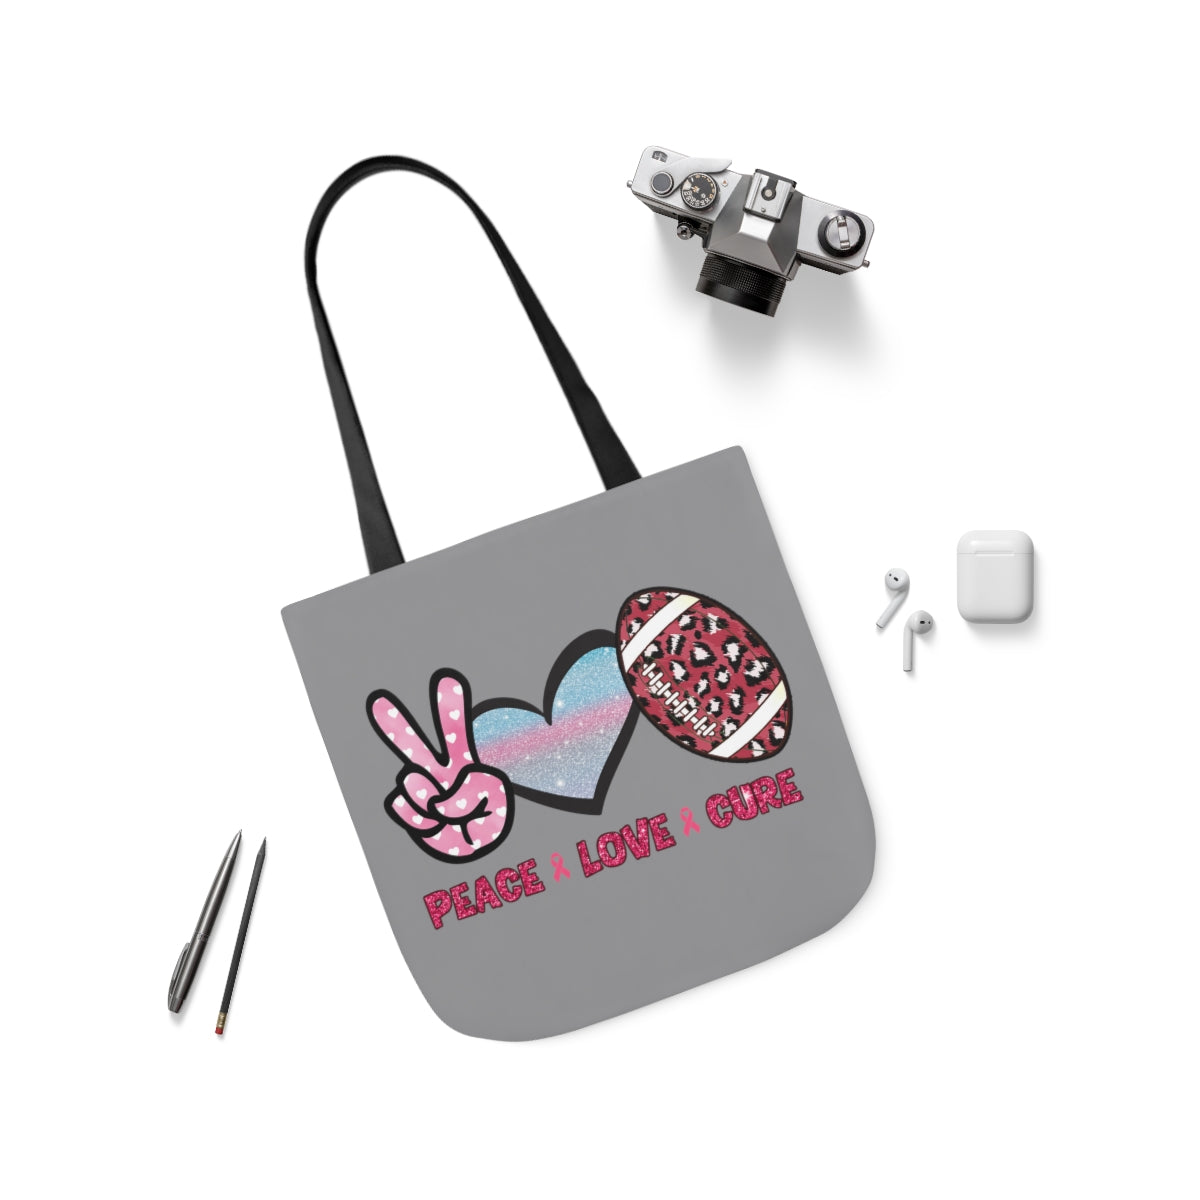 Peace Love Cure Canvas Tote Bag| Breast Cancer Tote Bag